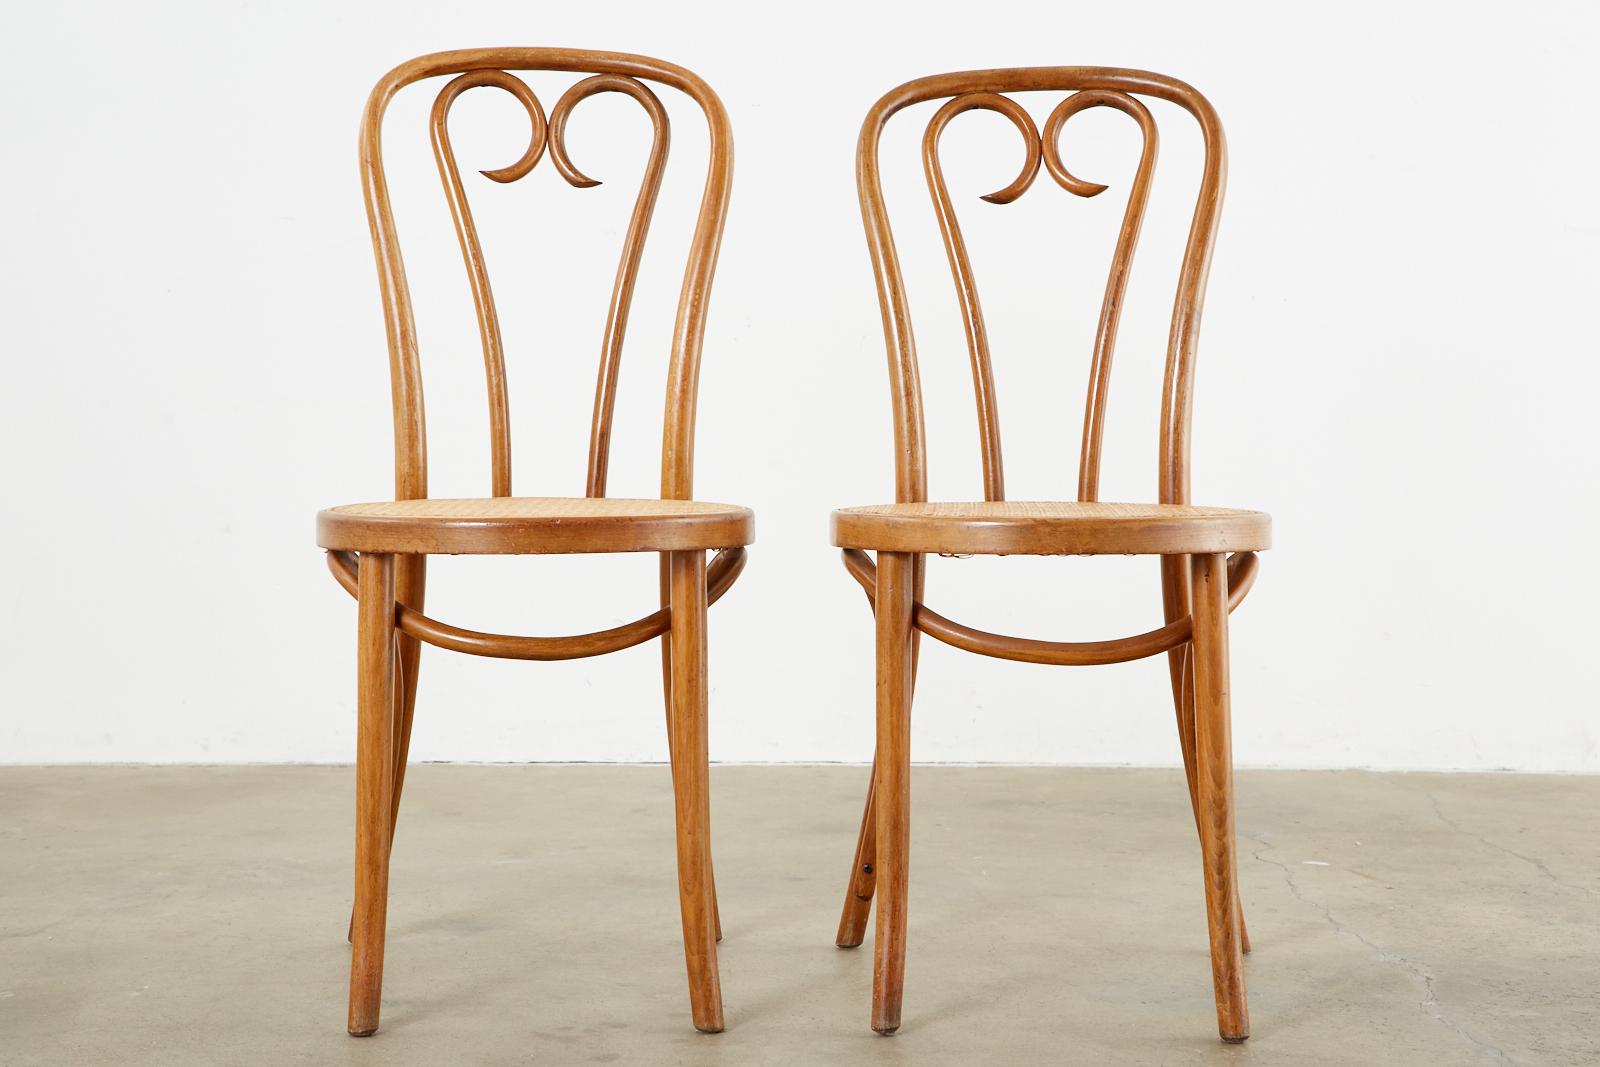 Matched pair of bentwood cafe bistro chairs designed by Michael Thonet know as the A-16 model. The chairs feature an iconic heart design back splat with a hand-caned seat. Beautifully crafted with a nicely aged patina on the finish. Original and